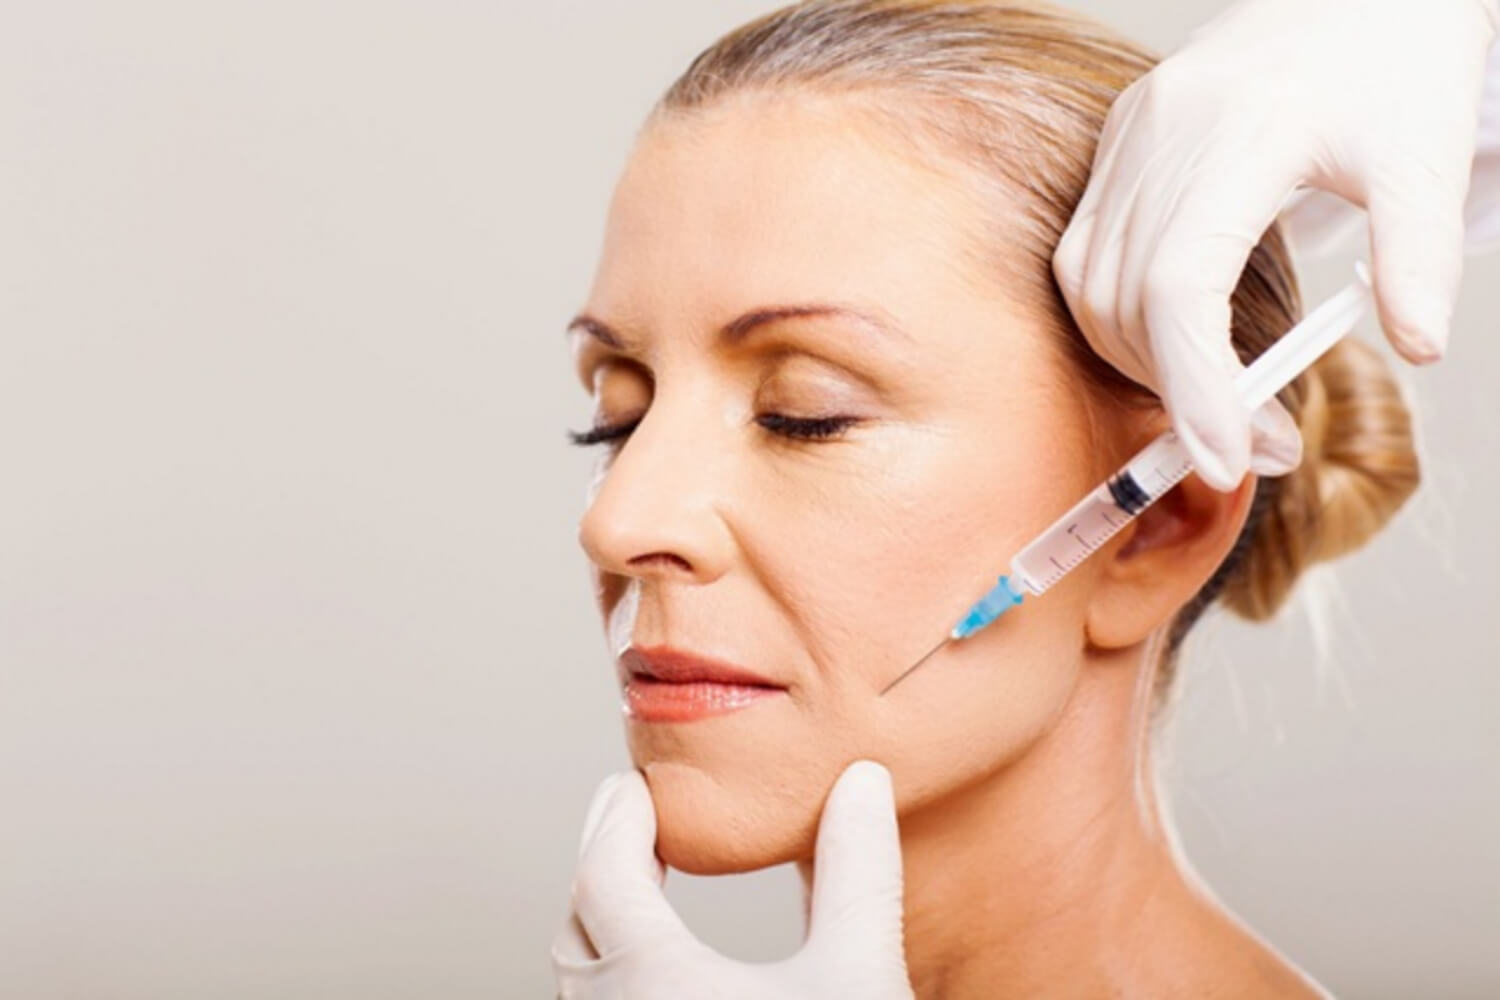 Botox injections do not remove wrinkles but only provide a blurring effect